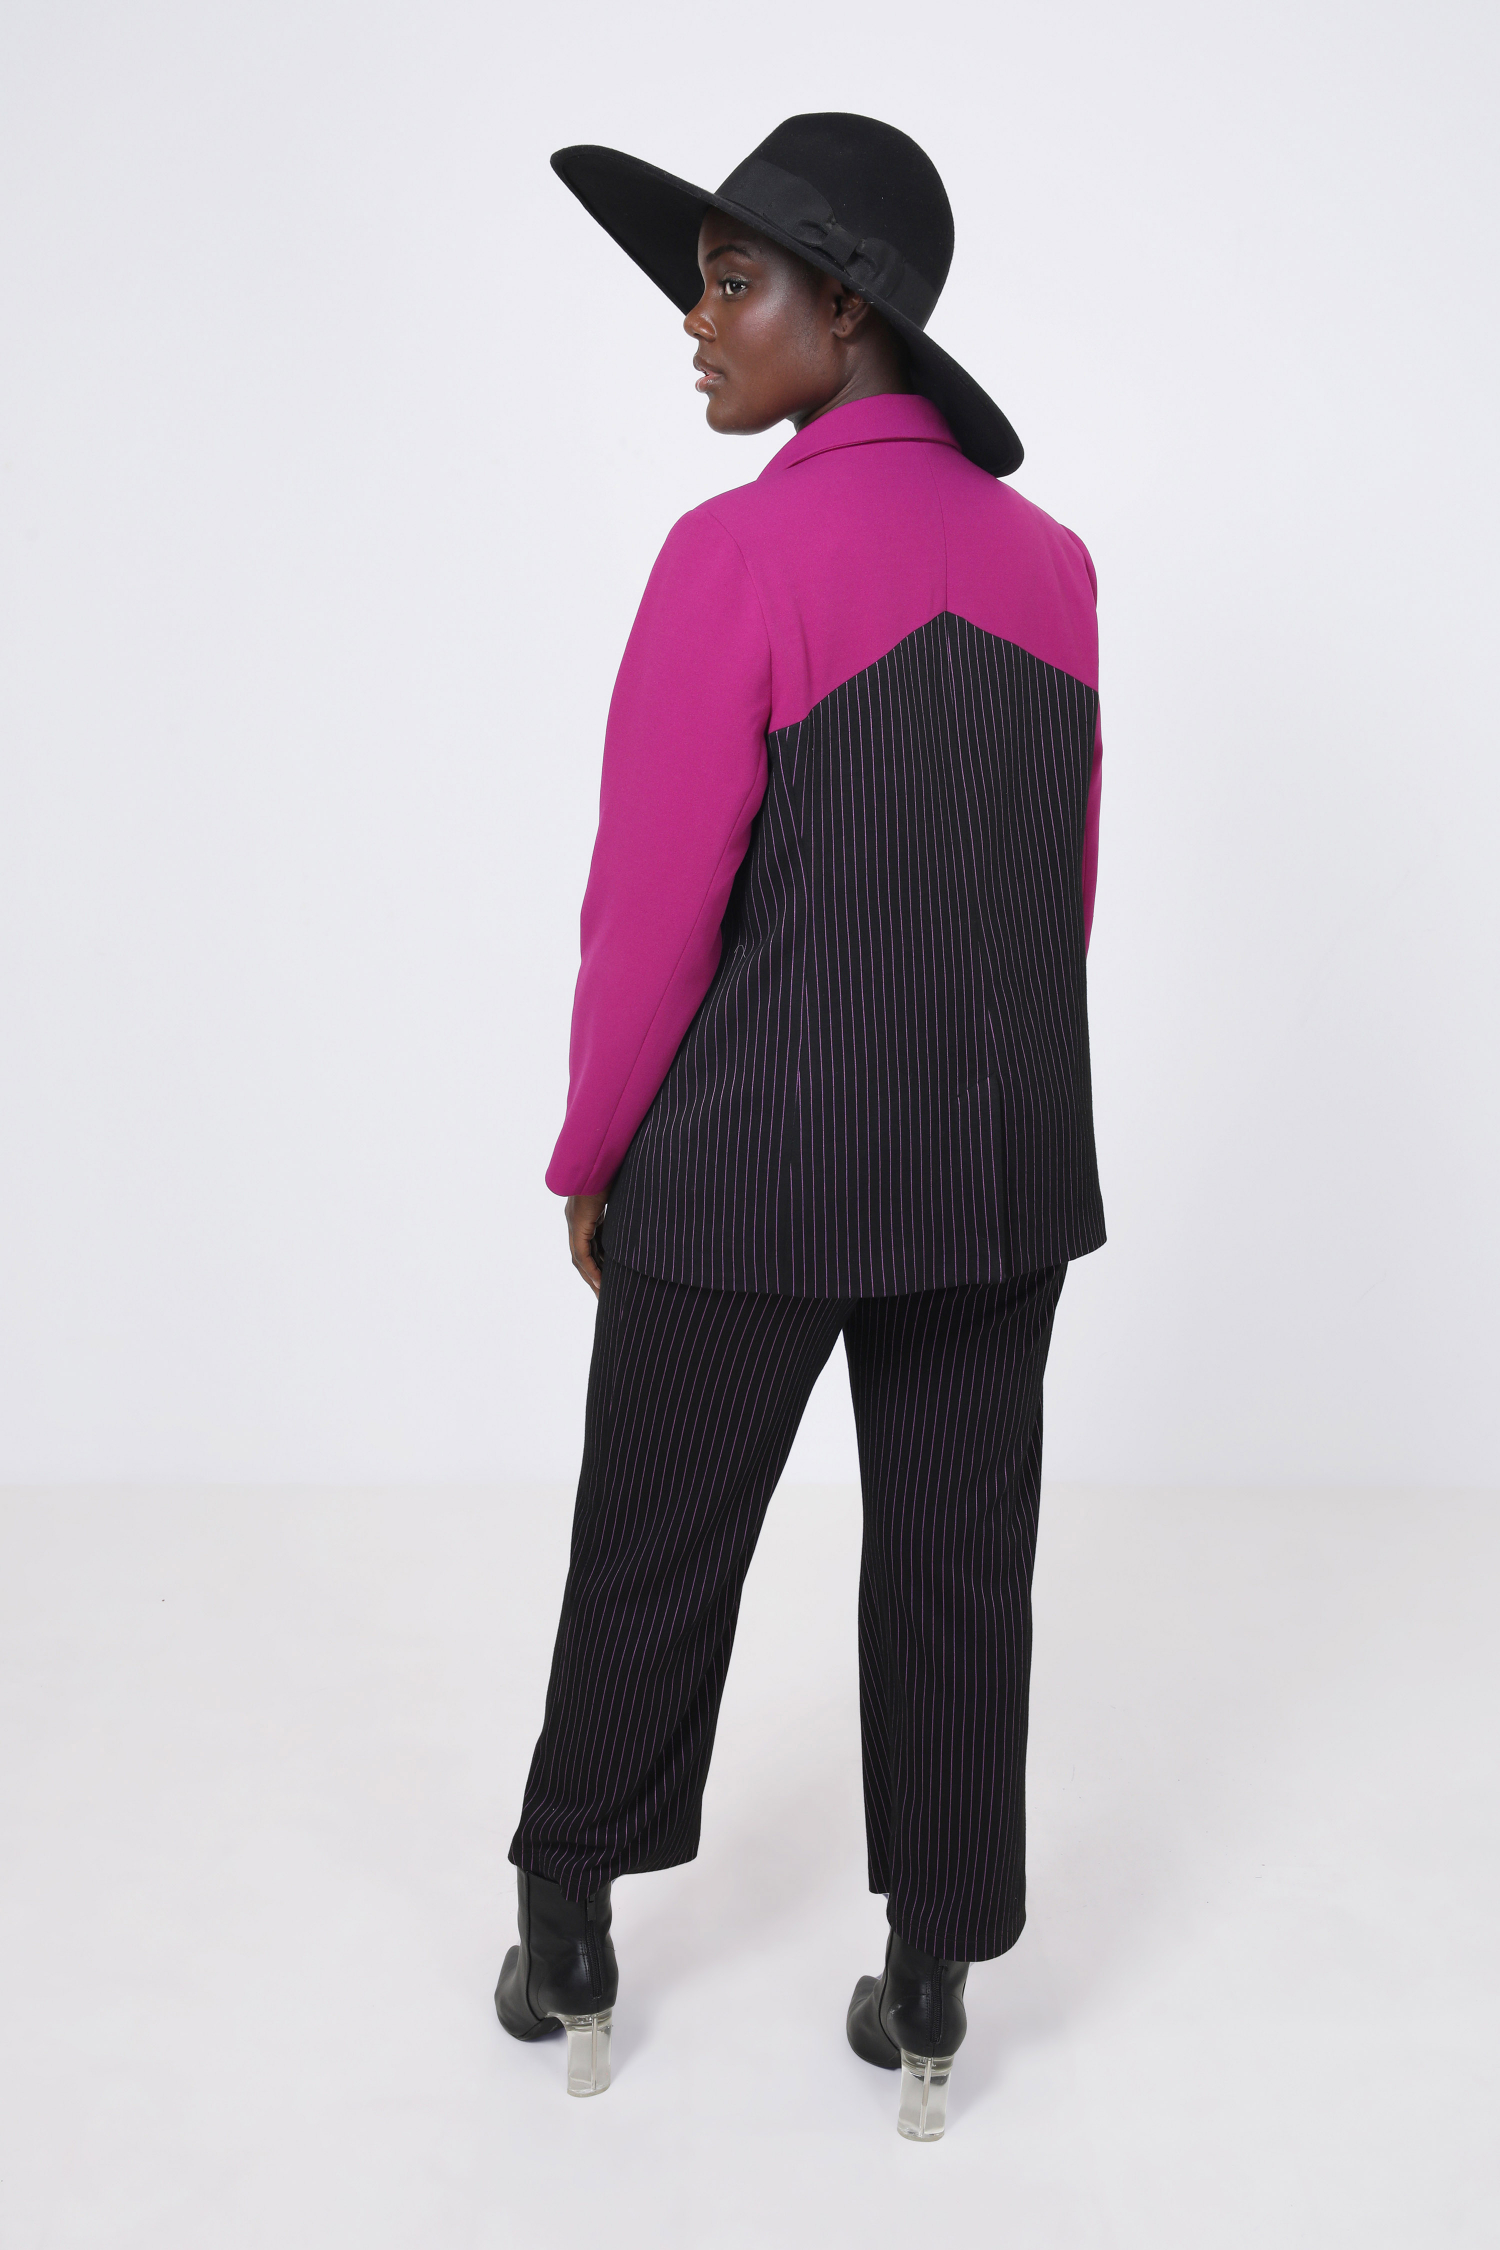 Two-tone striped/magenta knit suit jacket